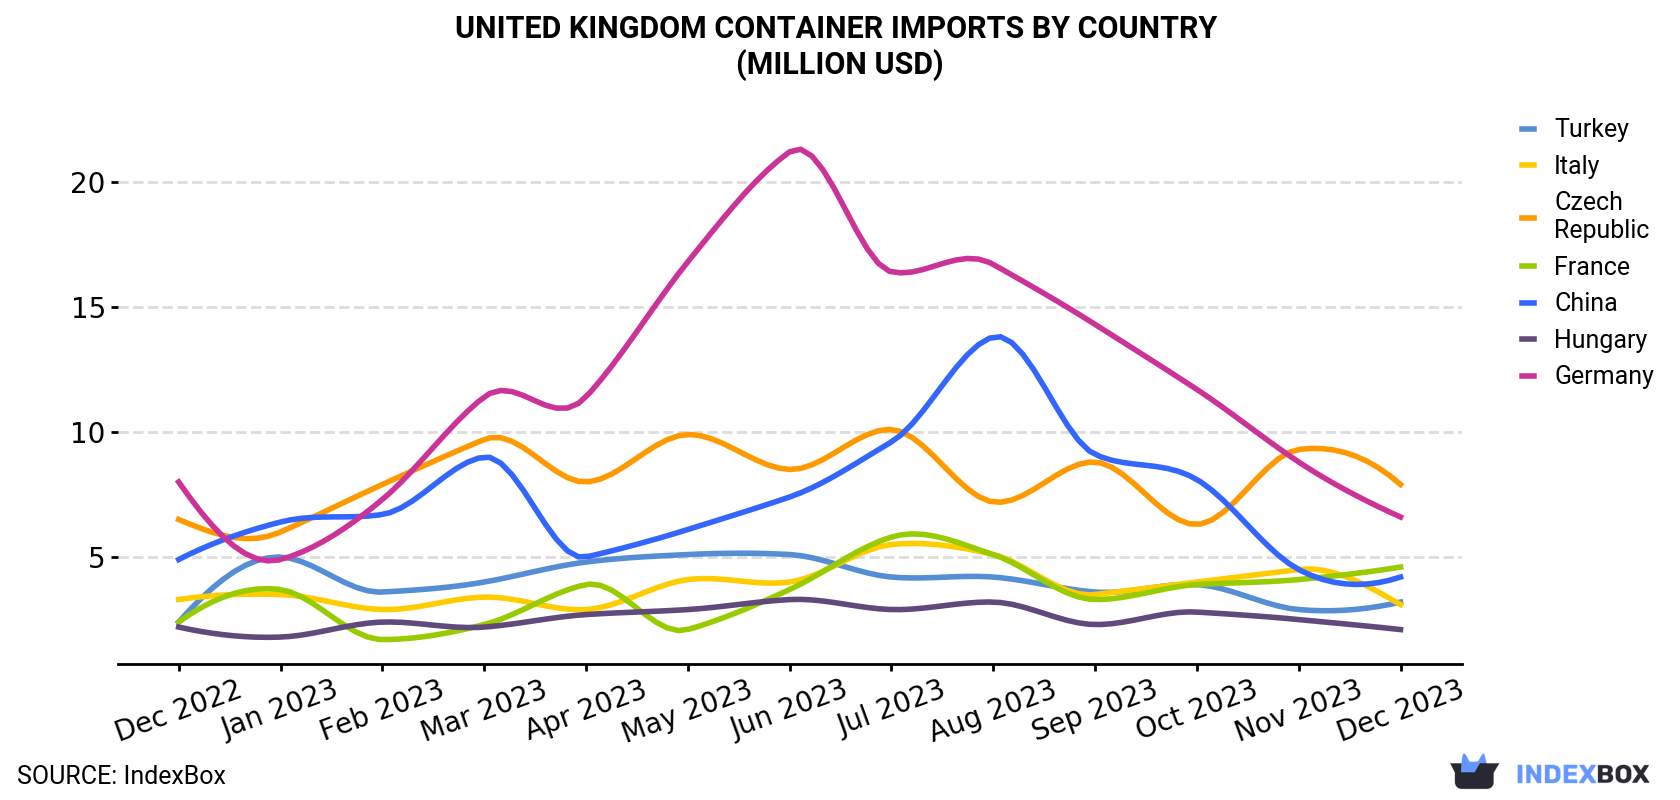 United Kingdom Container Imports By Country (Million USD)